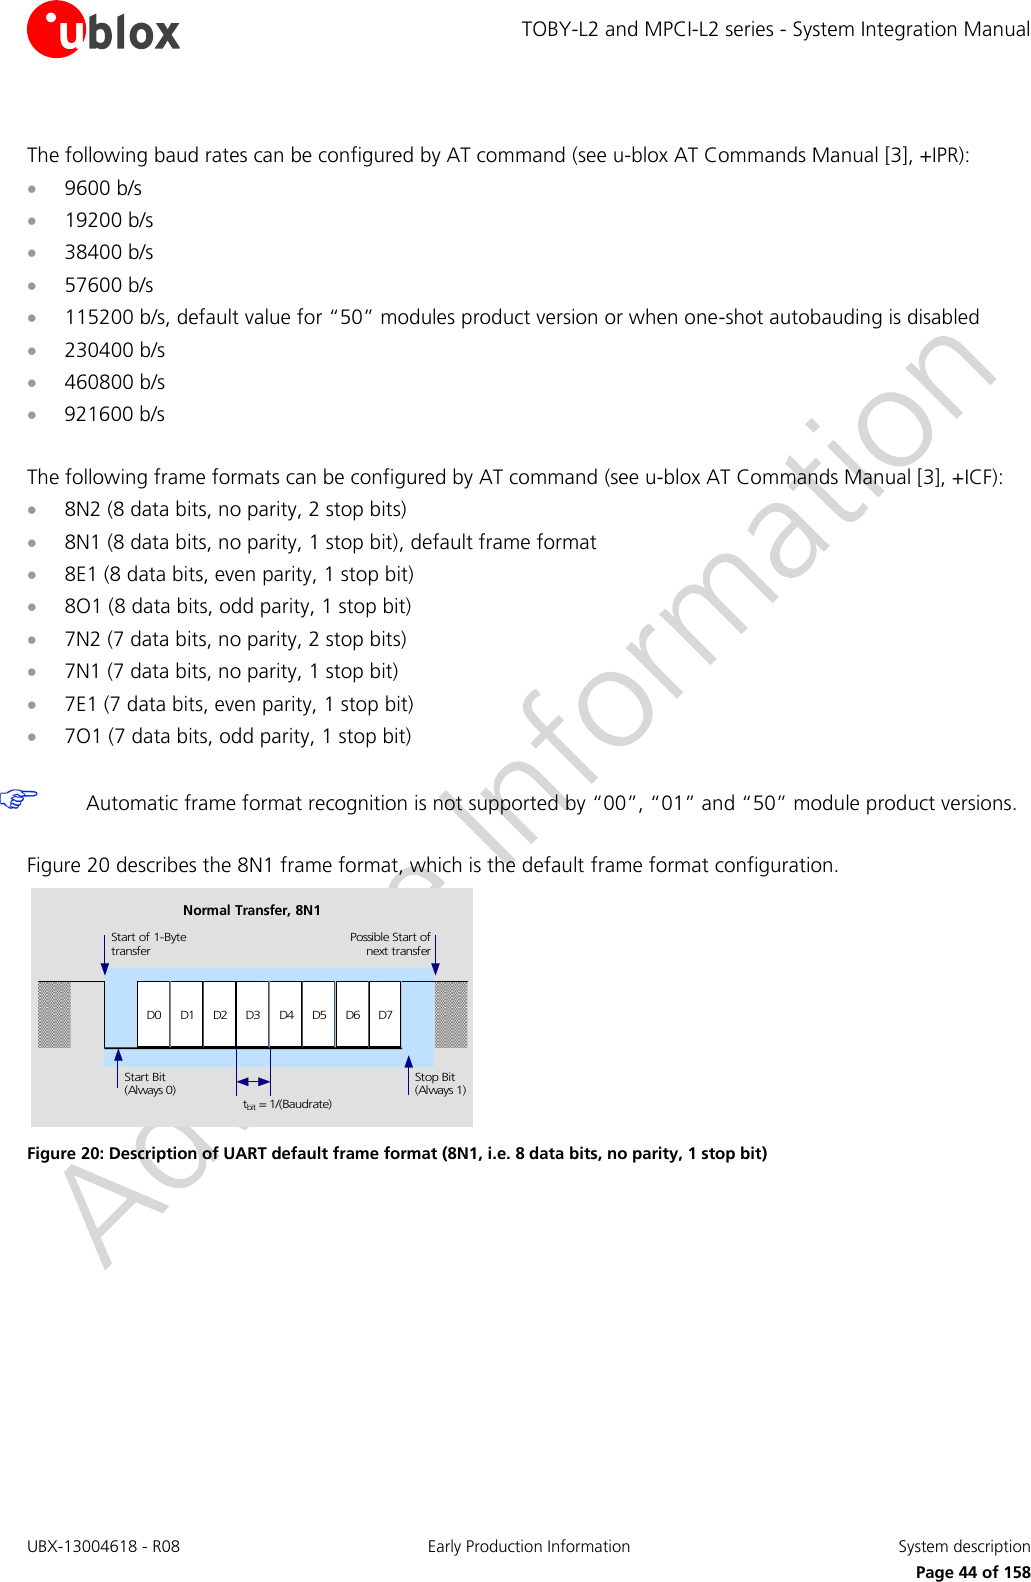 TOBY-L2 and MPCI-L2 series - System Integration Manual UBX-13004618 - R08  Early Production Information  System description     Page 44 of 158  The following baud rates can be configured by AT command (see u-blox AT Commands Manual [3], +IPR):  9600 b/s  19200 b/s  38400 b/s  57600 b/s  115200 b/s, default value for “50” modules product version or when one-shot autobauding is disabled  230400 b/s  460800 b/s  921600 b/s  The following frame formats can be configured by AT command (see u-blox AT Commands Manual [3], +ICF):  8N2 (8 data bits, no parity, 2 stop bits)  8N1 (8 data bits, no parity, 1 stop bit), default frame format  8E1 (8 data bits, even parity, 1 stop bit)  8O1 (8 data bits, odd parity, 1 stop bit)  7N2 (7 data bits, no parity, 2 stop bits)  7N1 (7 data bits, no parity, 1 stop bit)  7E1 (7 data bits, even parity, 1 stop bit)  7O1 (7 data bits, odd parity, 1 stop bit)   Automatic frame format recognition is not supported by “00”, “01” and “50” module product versions.  Figure 20 describes the 8N1 frame format, which is the default frame format configuration. D0 D1 D2 D3 D4 D5 D6 D7Start of 1-BytetransferStart Bit(Always 0)Possible Start ofnext transferStop Bit(Always 1)tbit = 1/(Baudrate)Normal Transfer, 8N1 Figure 20: Description of UART default frame format (8N1, i.e. 8 data bits, no parity, 1 stop bit)   